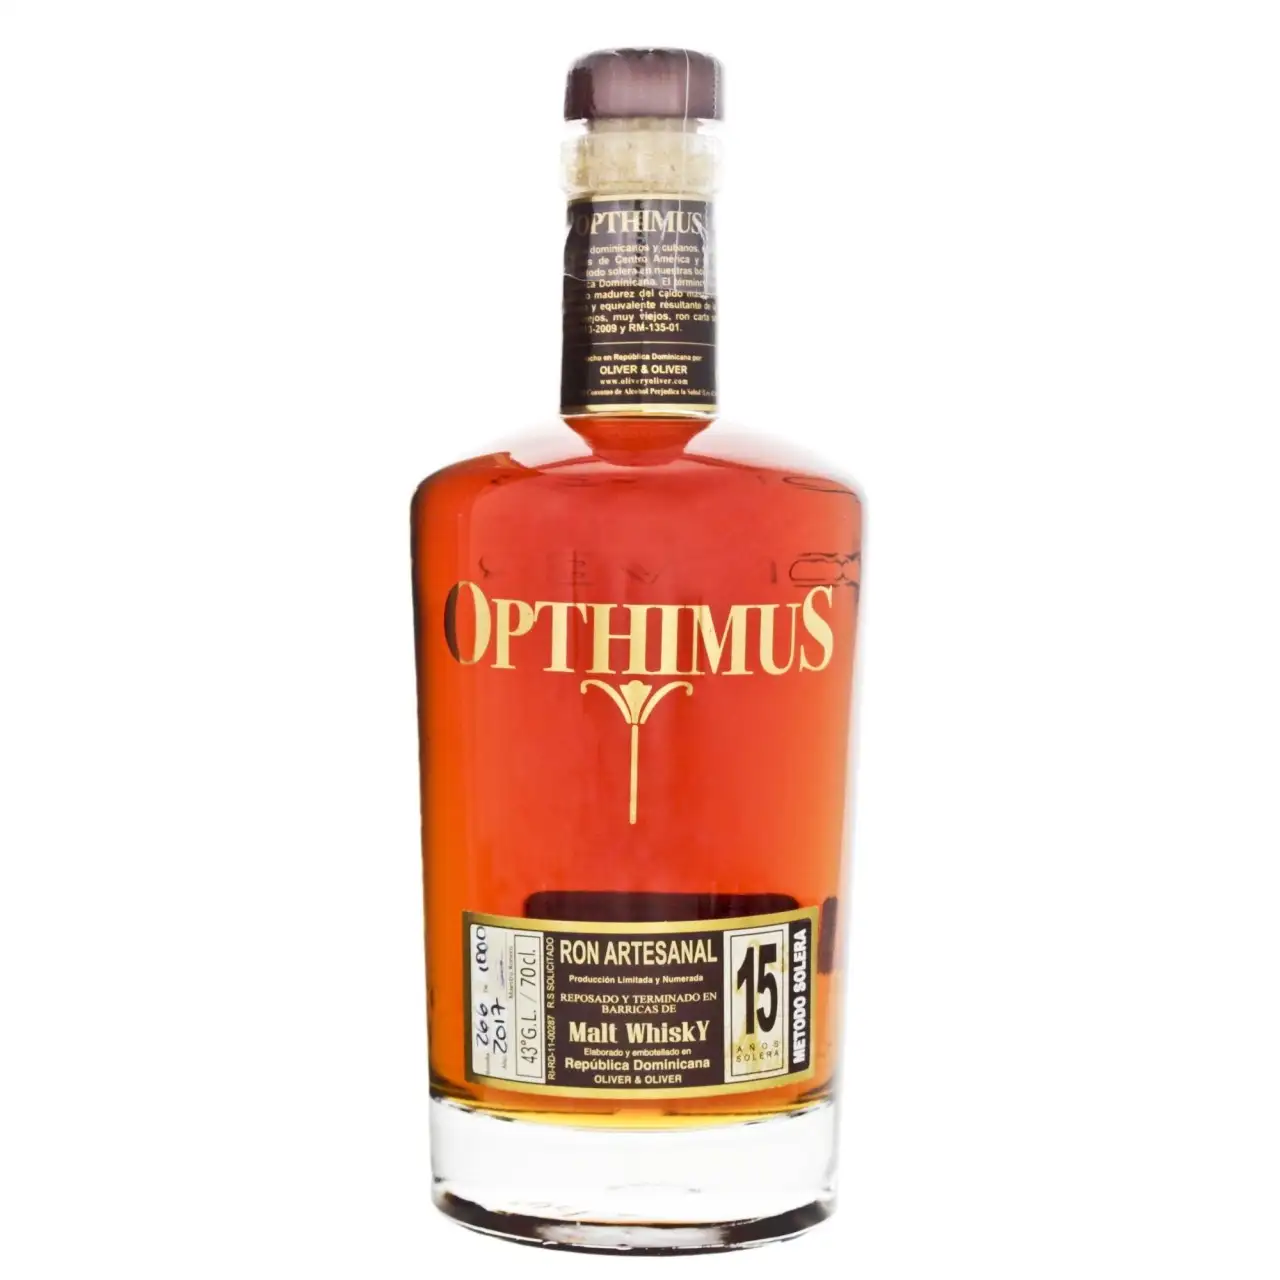 Image of the front of the bottle of the rum Opthimus 15 Años Malt Whisky Finish